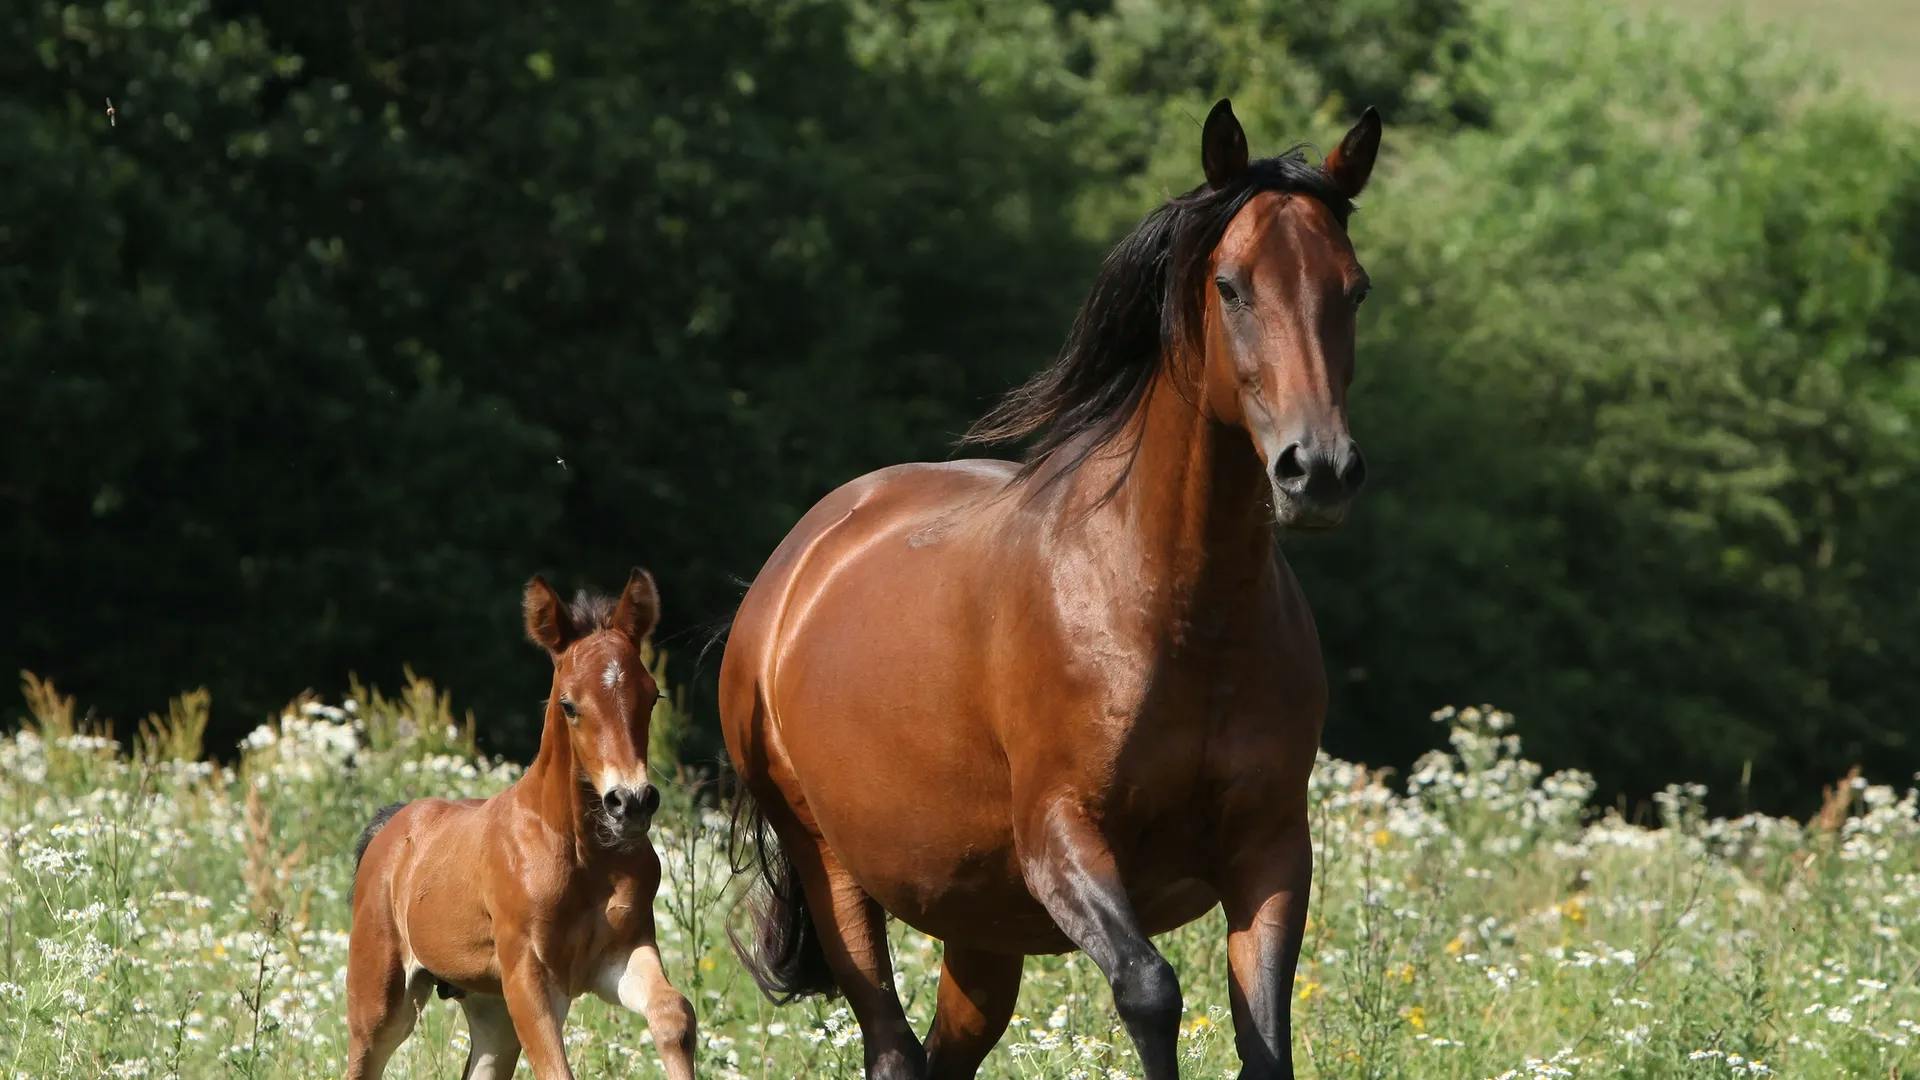 A bay mare and foal canter across a green field with small white flowers.